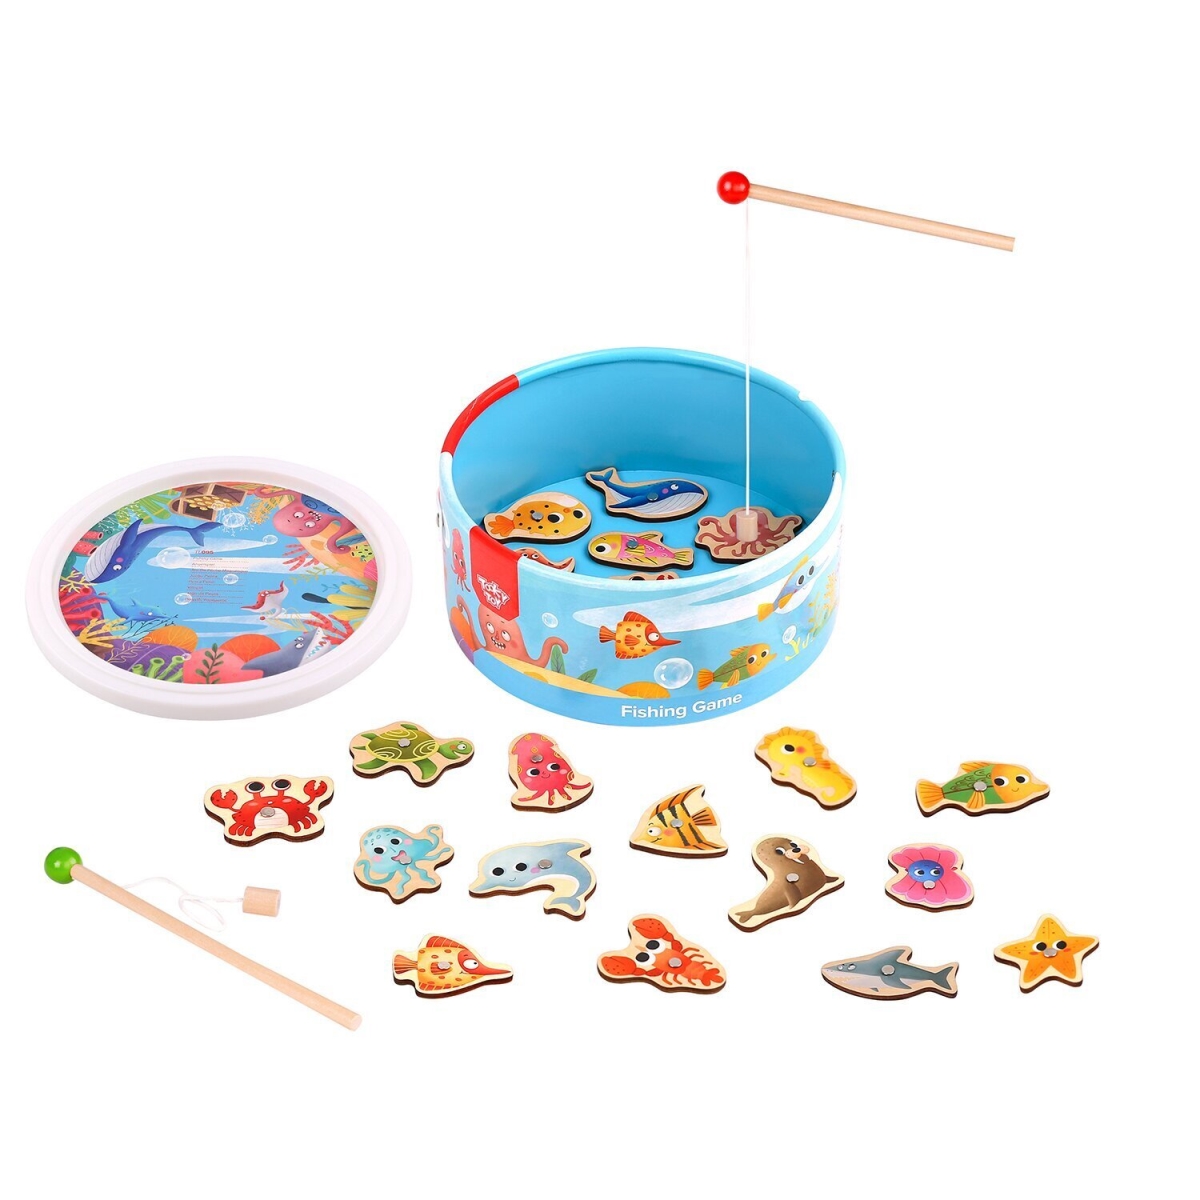 Picture of Tooky Toy 300275 22 x 22 x 9 cm Fishing Game